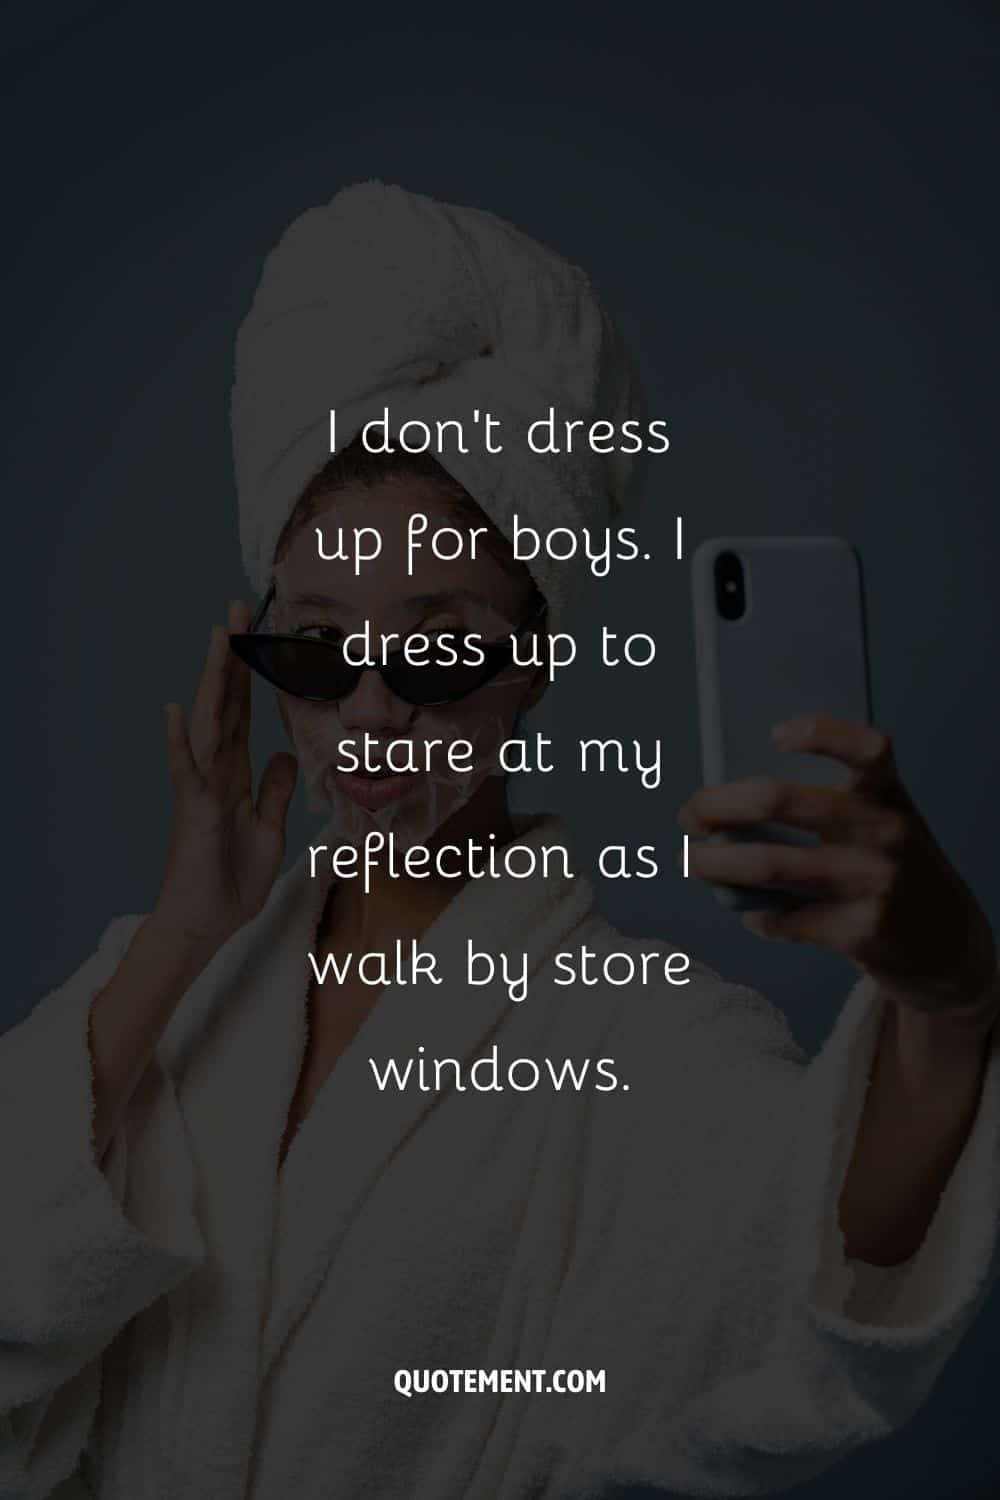 I don't dress up for boys. I dress up to stare at my reflection as I walk by store windows.